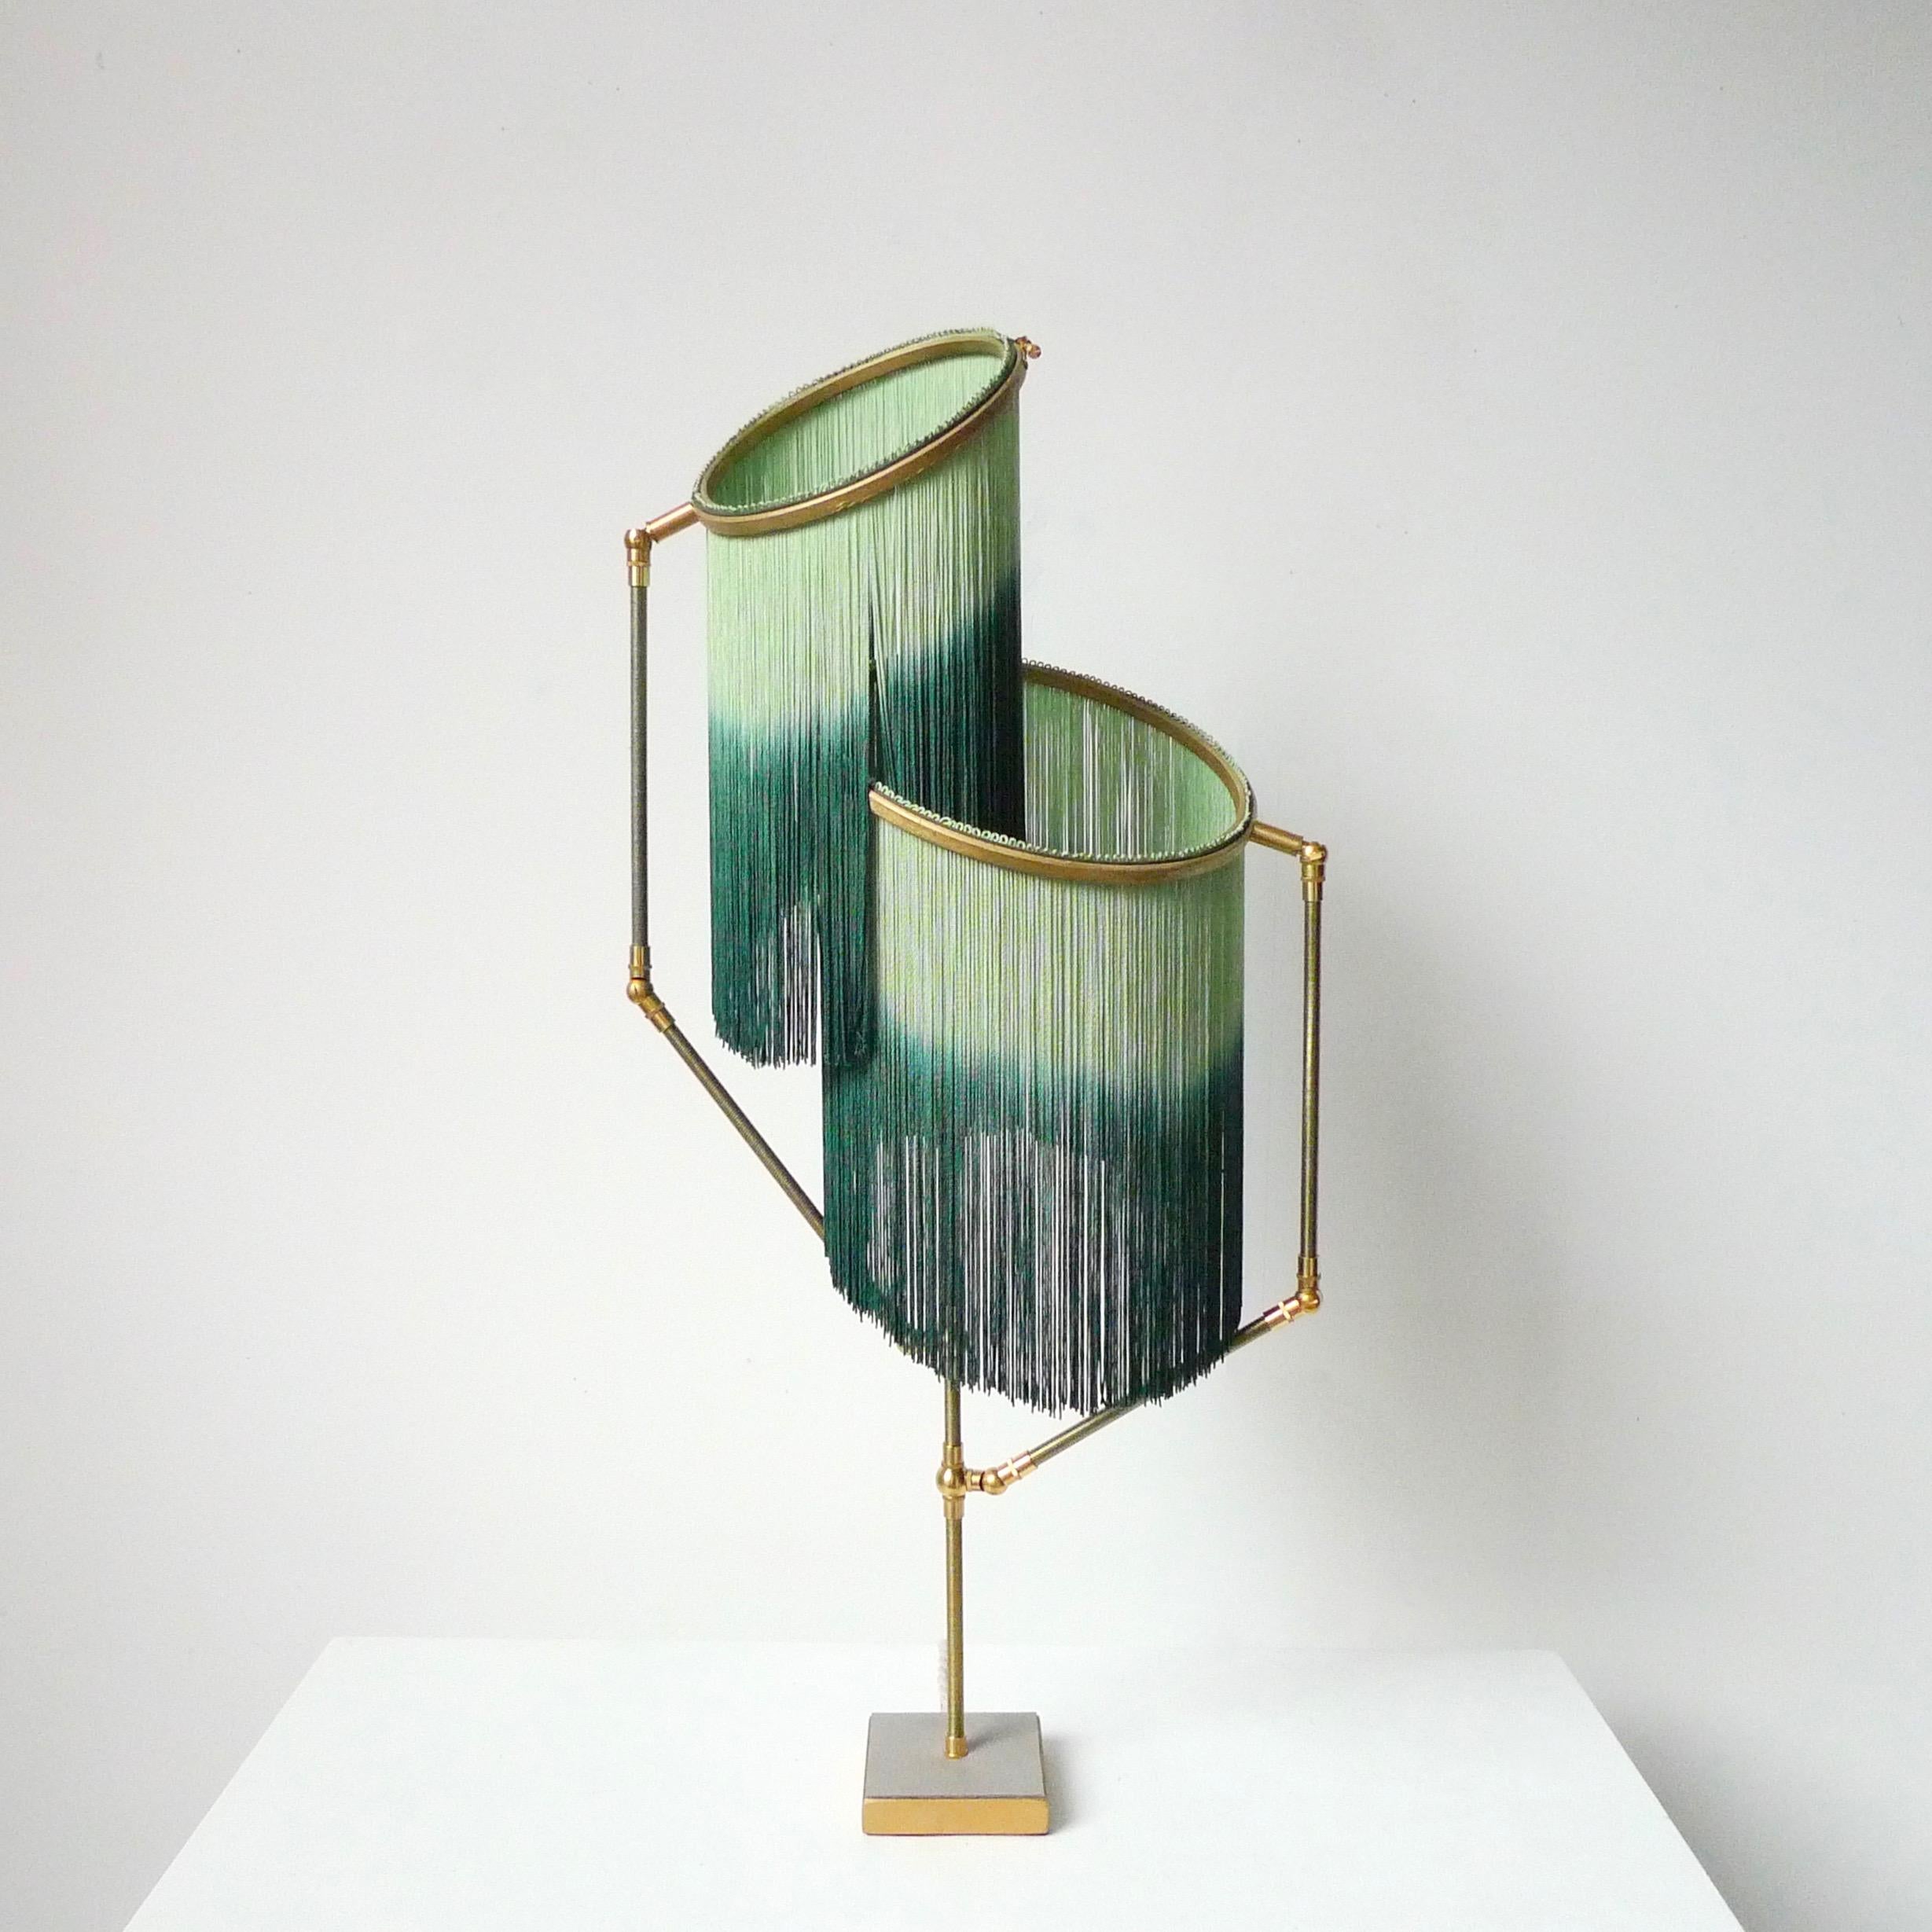 Charme Table Lamp by Sander Bottinga

Dimensions: H 73 x W 38 x D 25 cm
Hand-sculpted in brass, leather, wood and dip dyed colored Fringes in viscose.
The movable arms makes it possible to move the circles with fringes in differed positions.
So you